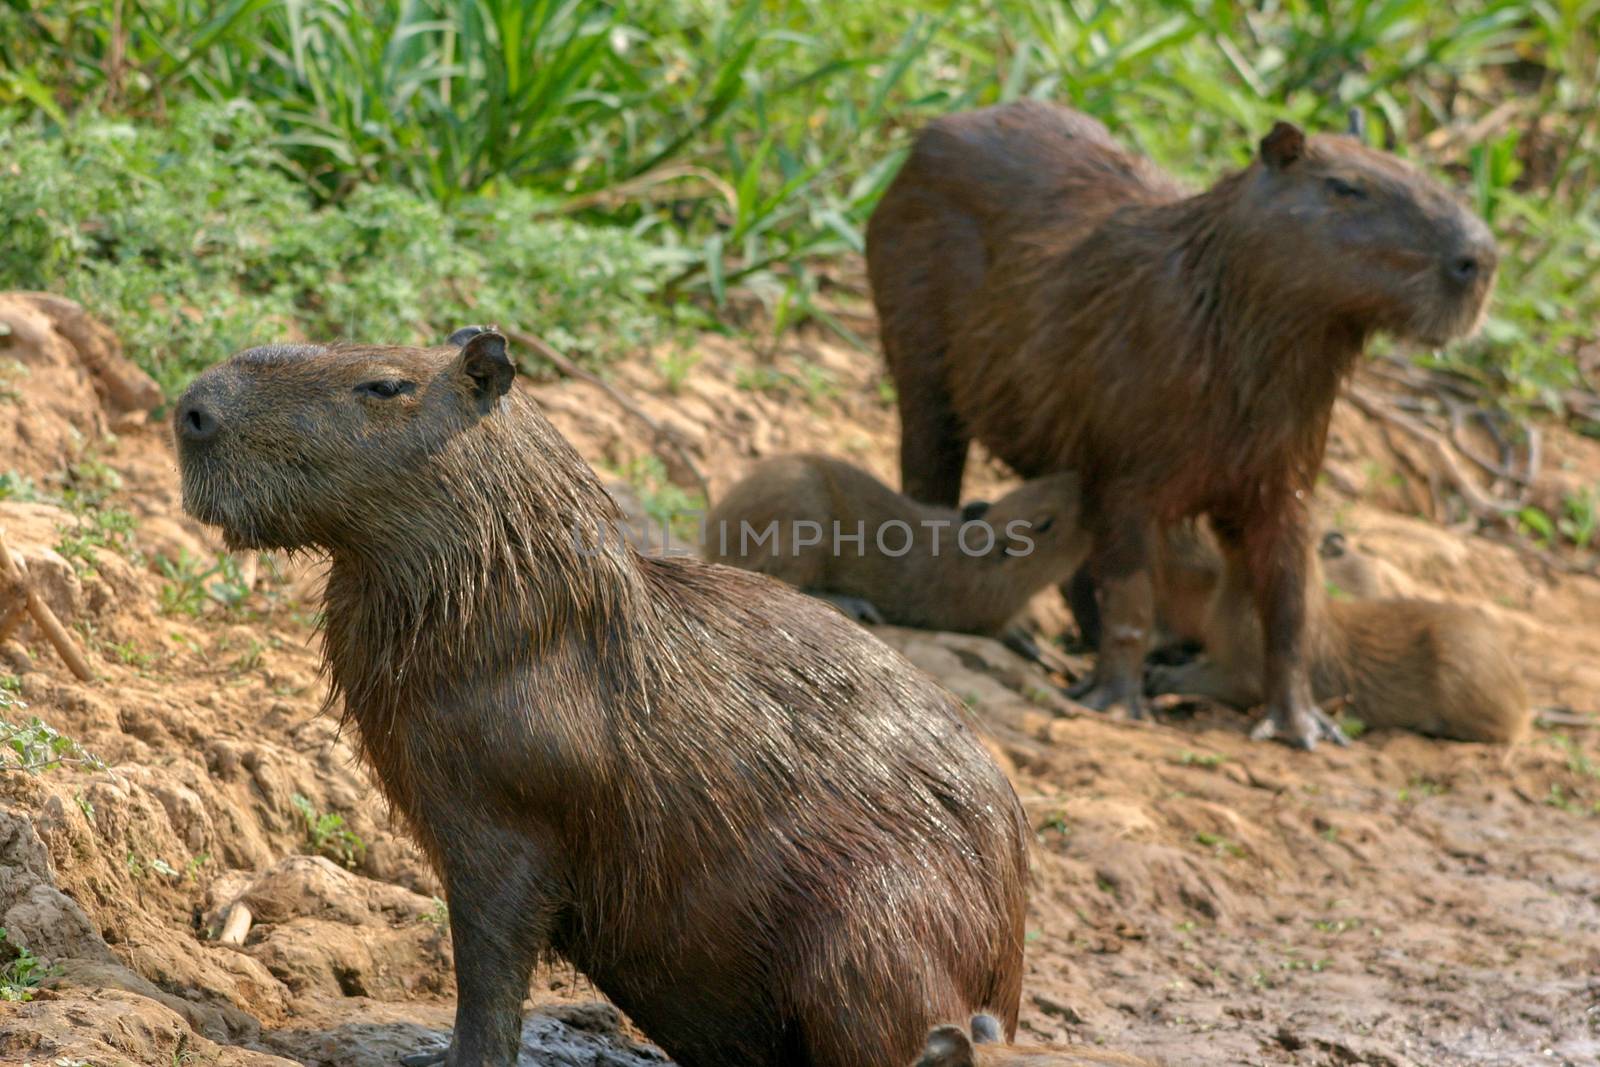 Capybaras, native to South America, are the largest rodent in the world.